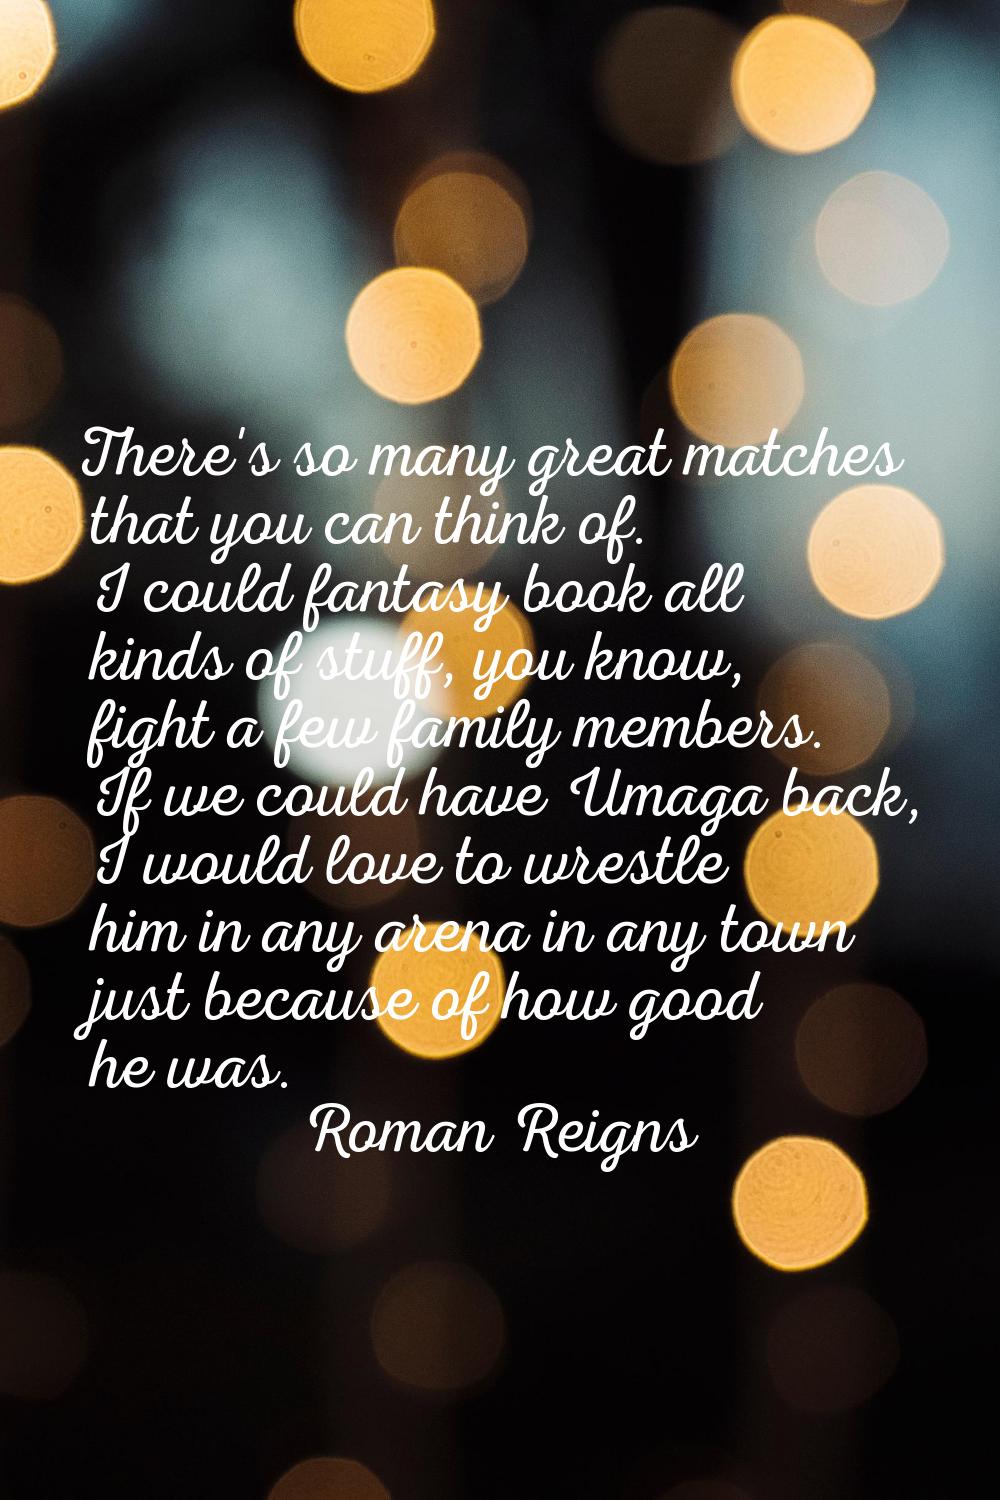 There's so many great matches that you can think of. I could fantasy book all kinds of stuff, you k